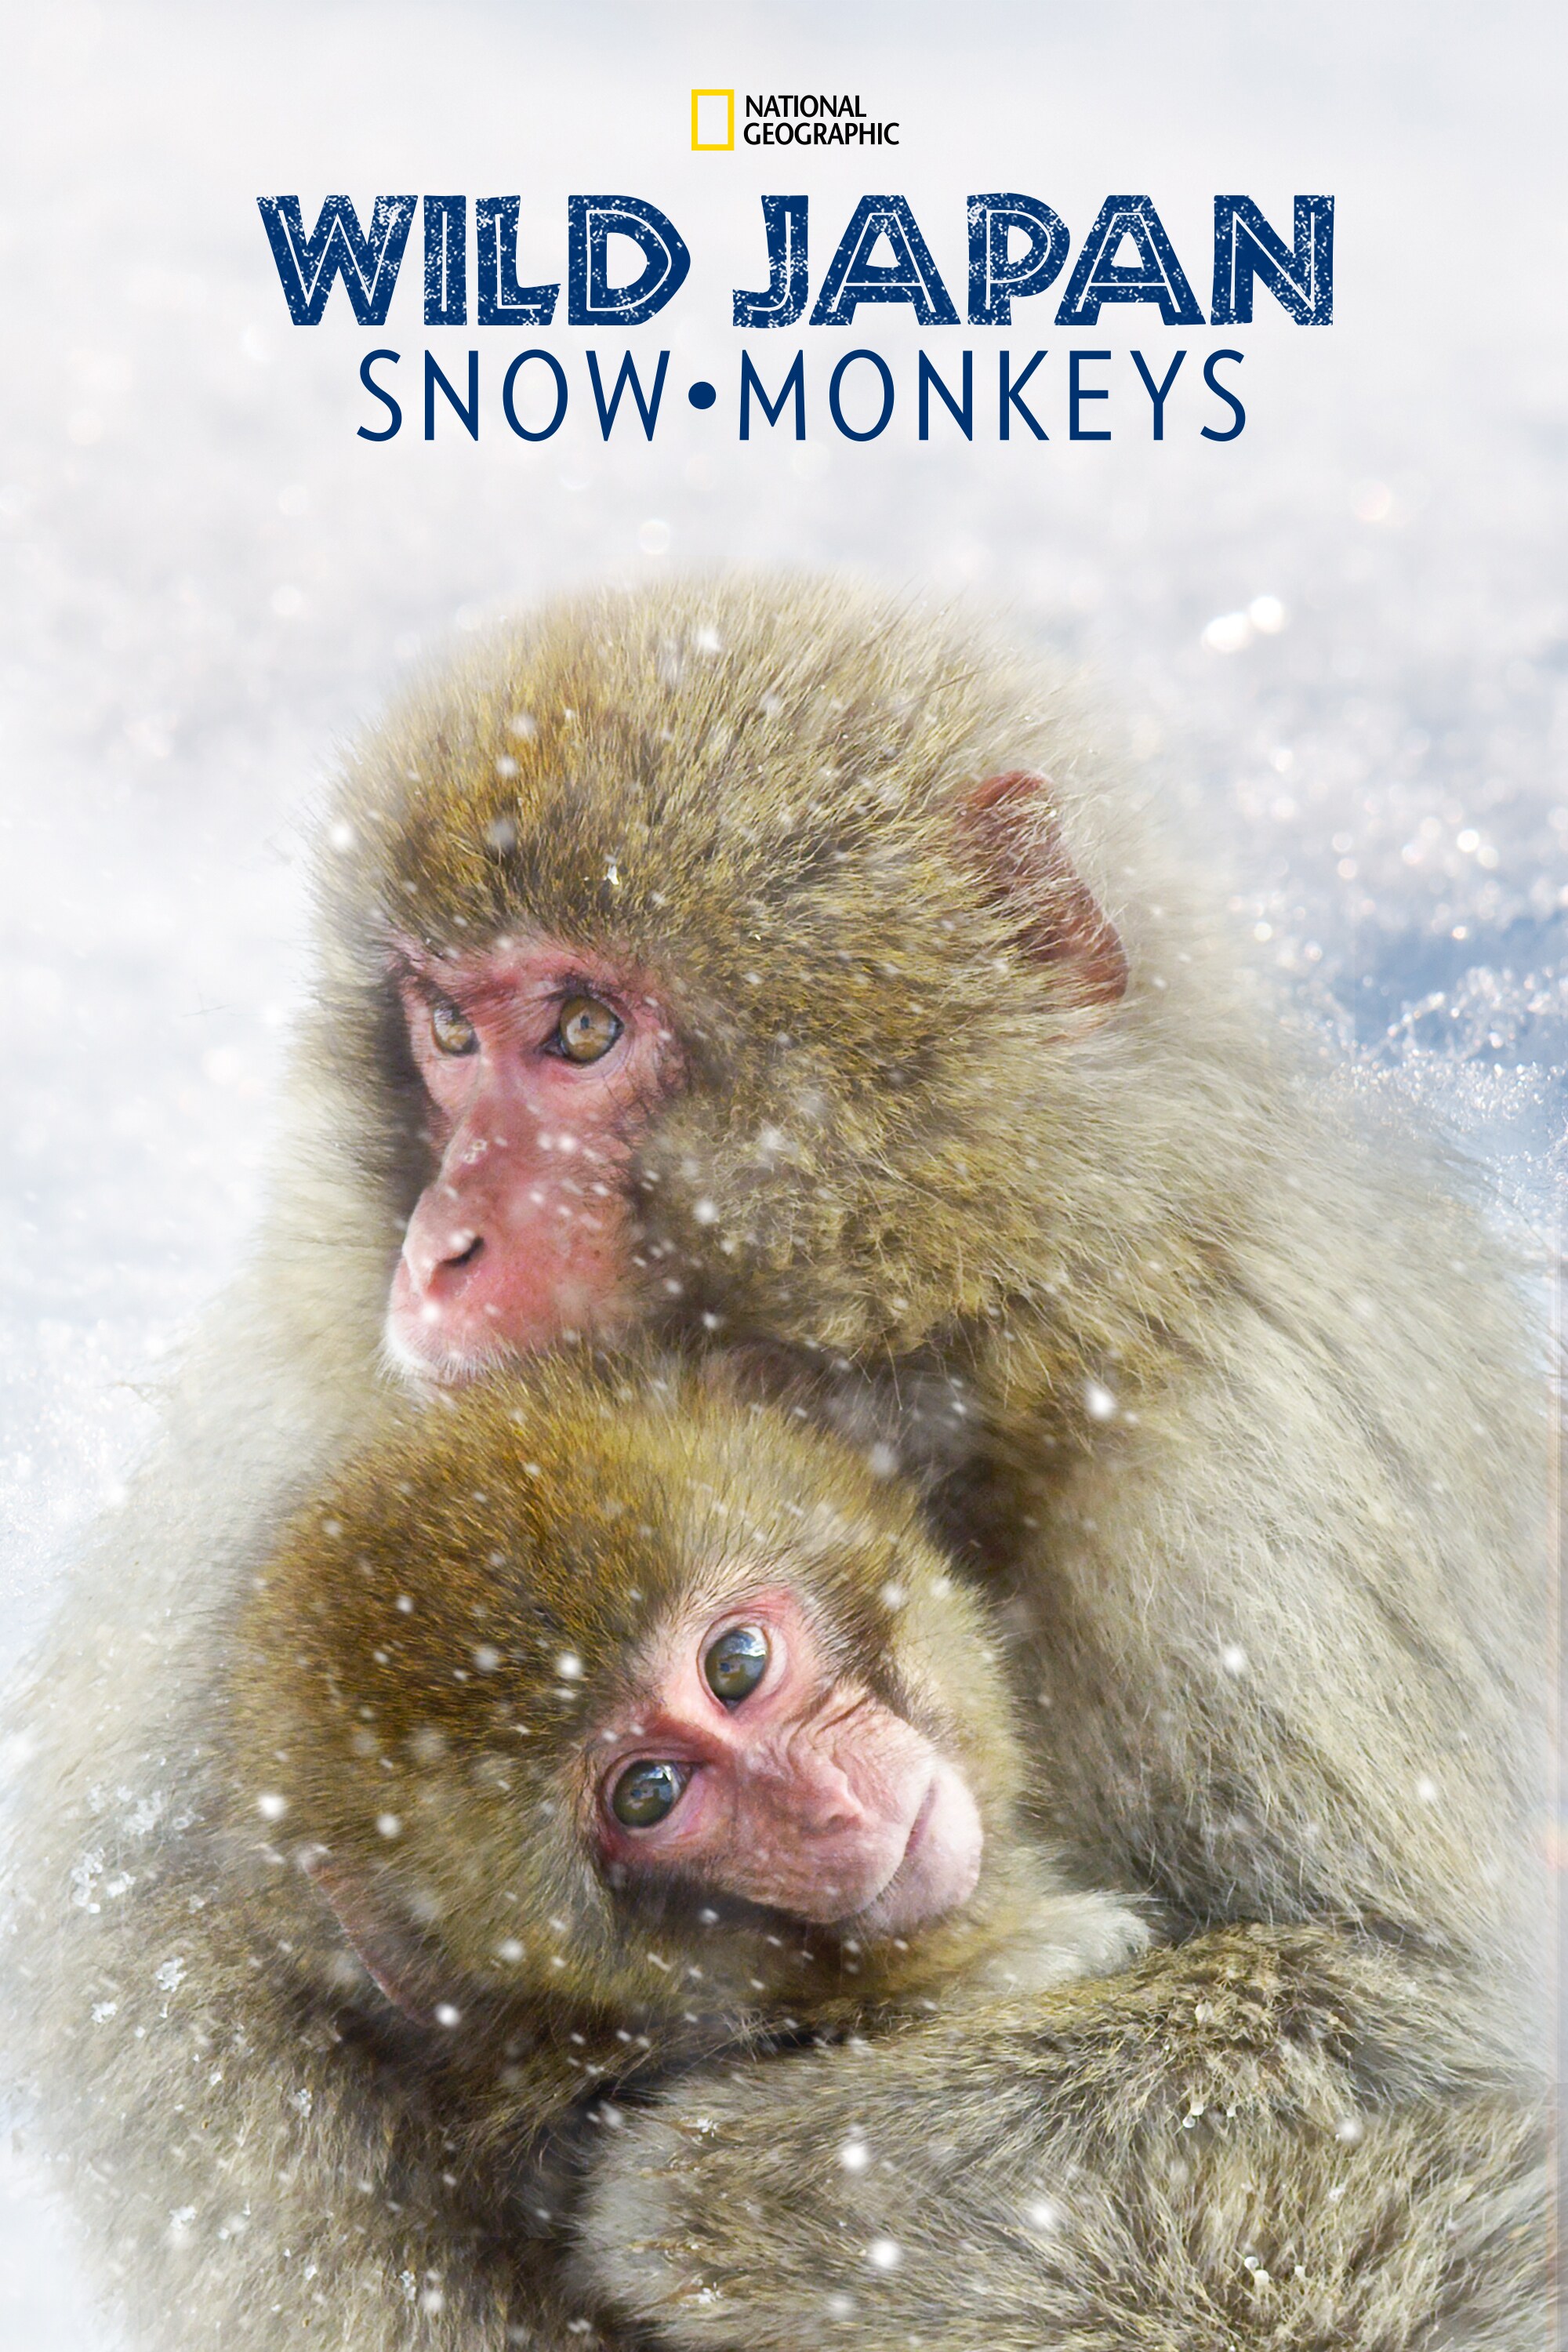 Two Japaneses snow monkeys clutch each other as snow falls.